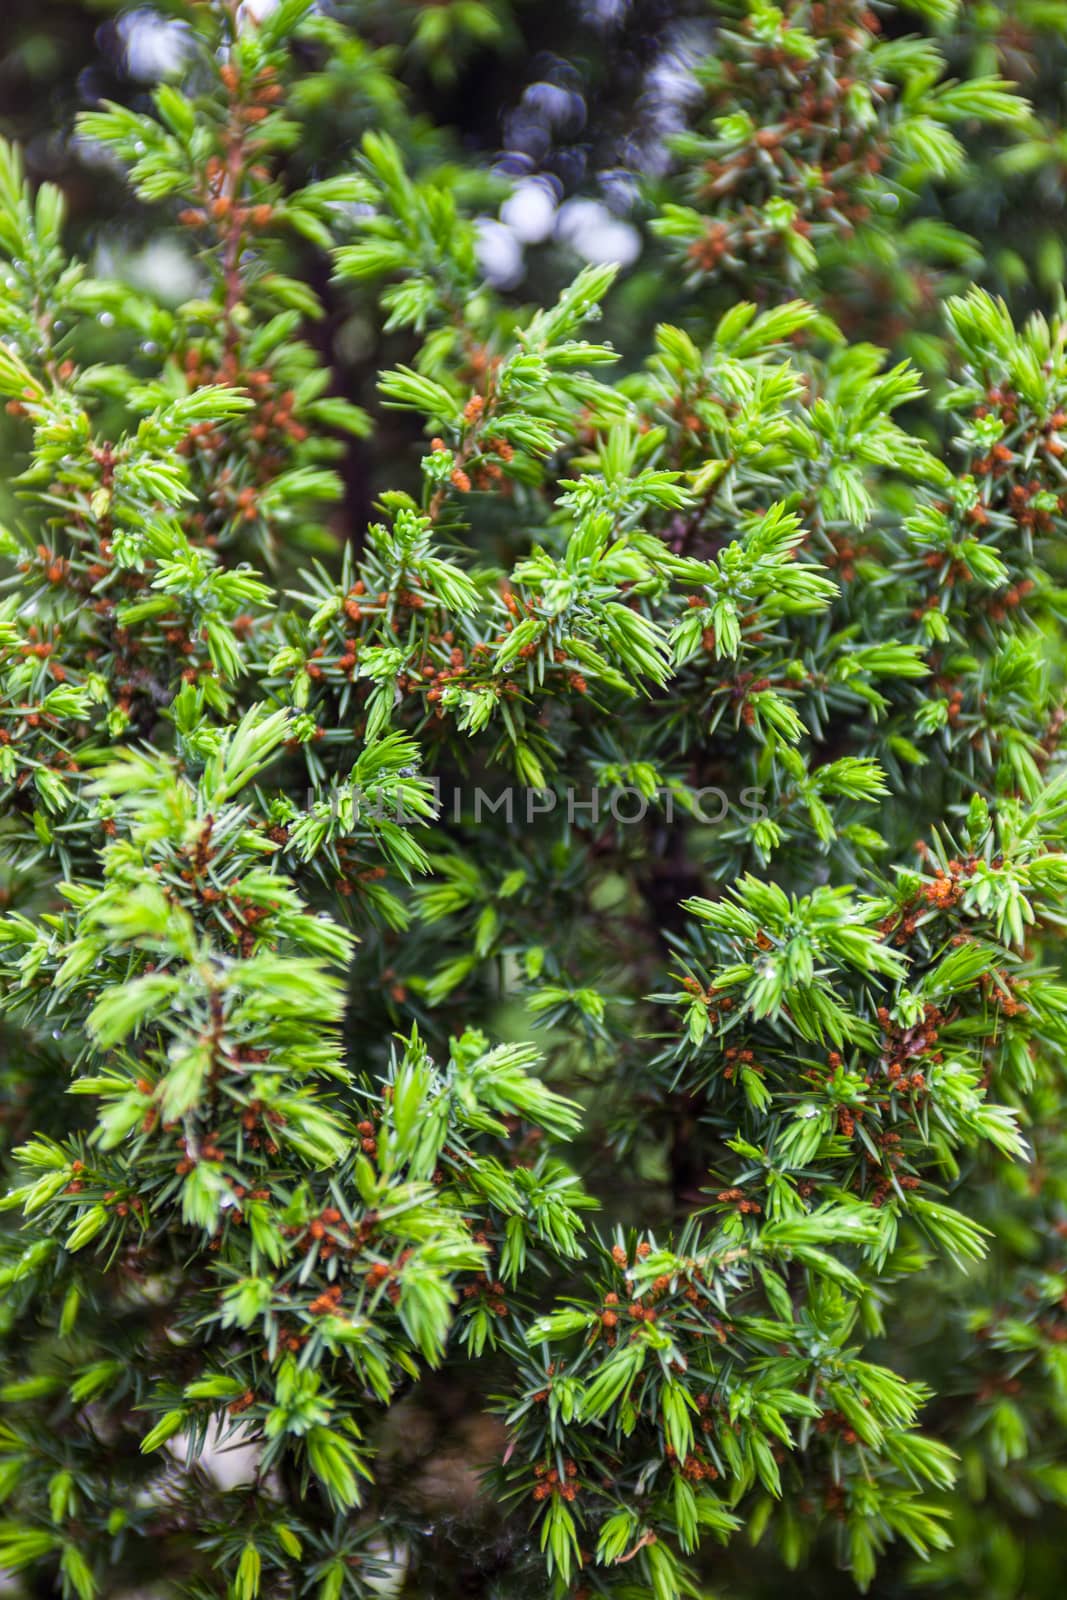 Conifer branches. Tiny cones and young light green shoots covered with drops of dew.